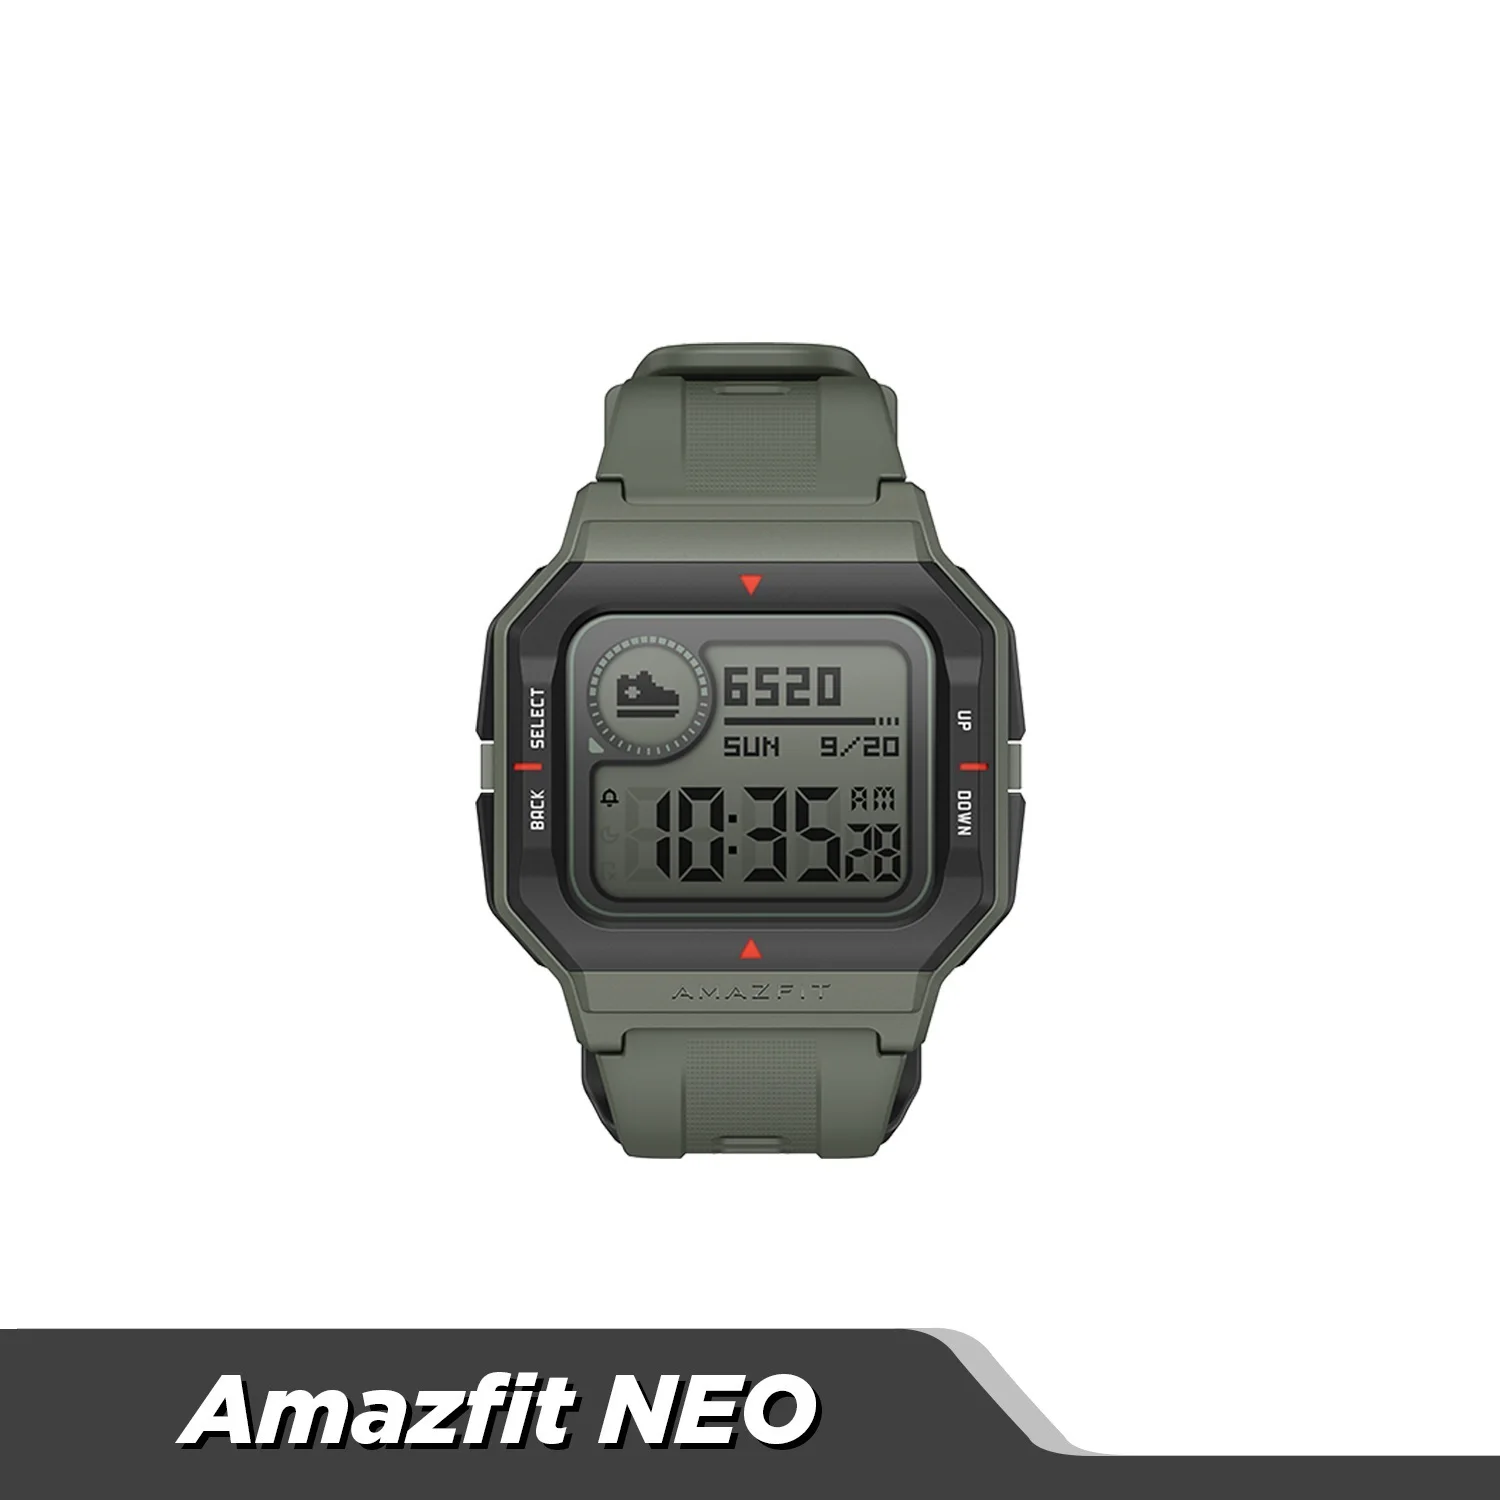 

Amazfit Neo Retro Design Smartwatch 5ATM Heart Rate Monitoring Sleep Tracking 28 Days Battery Life Smart Watch red black green